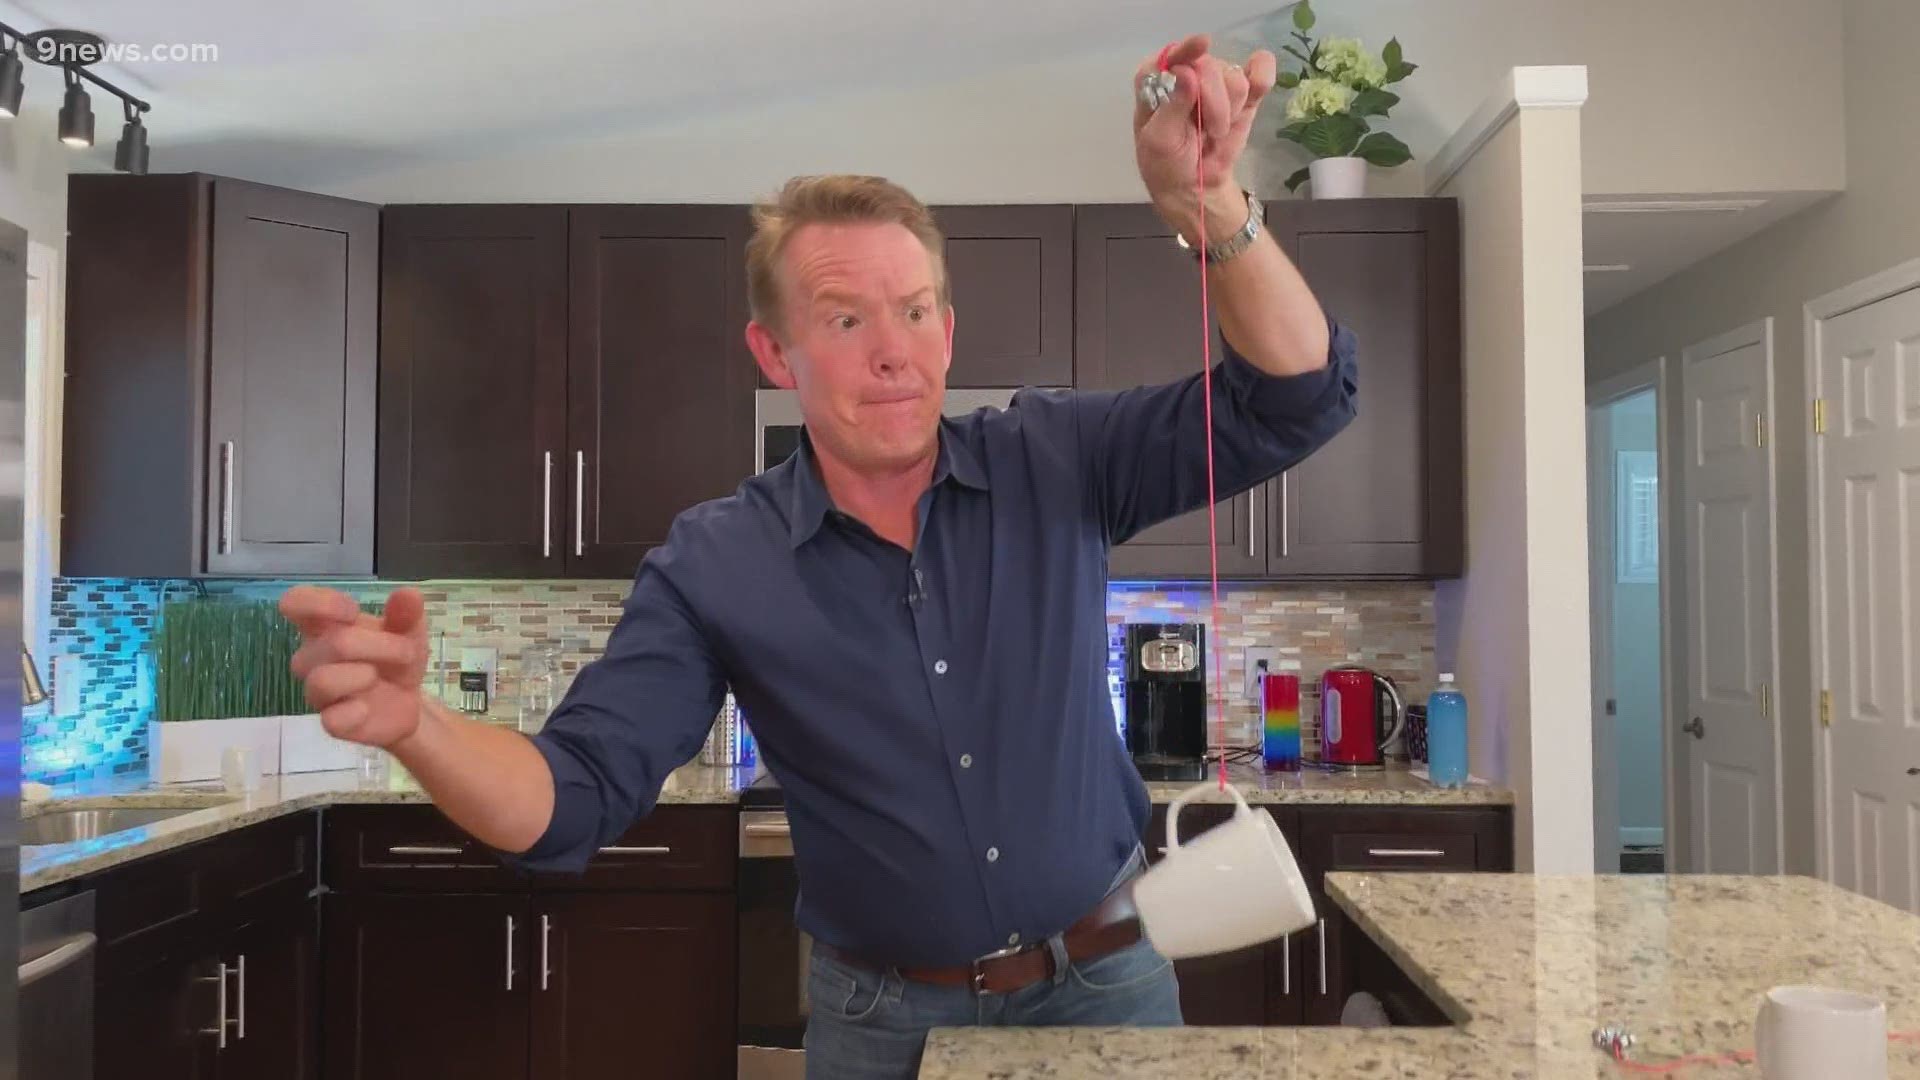 Steve Spangler turns his coffee cup into a swinging pendulum in today's science minute.